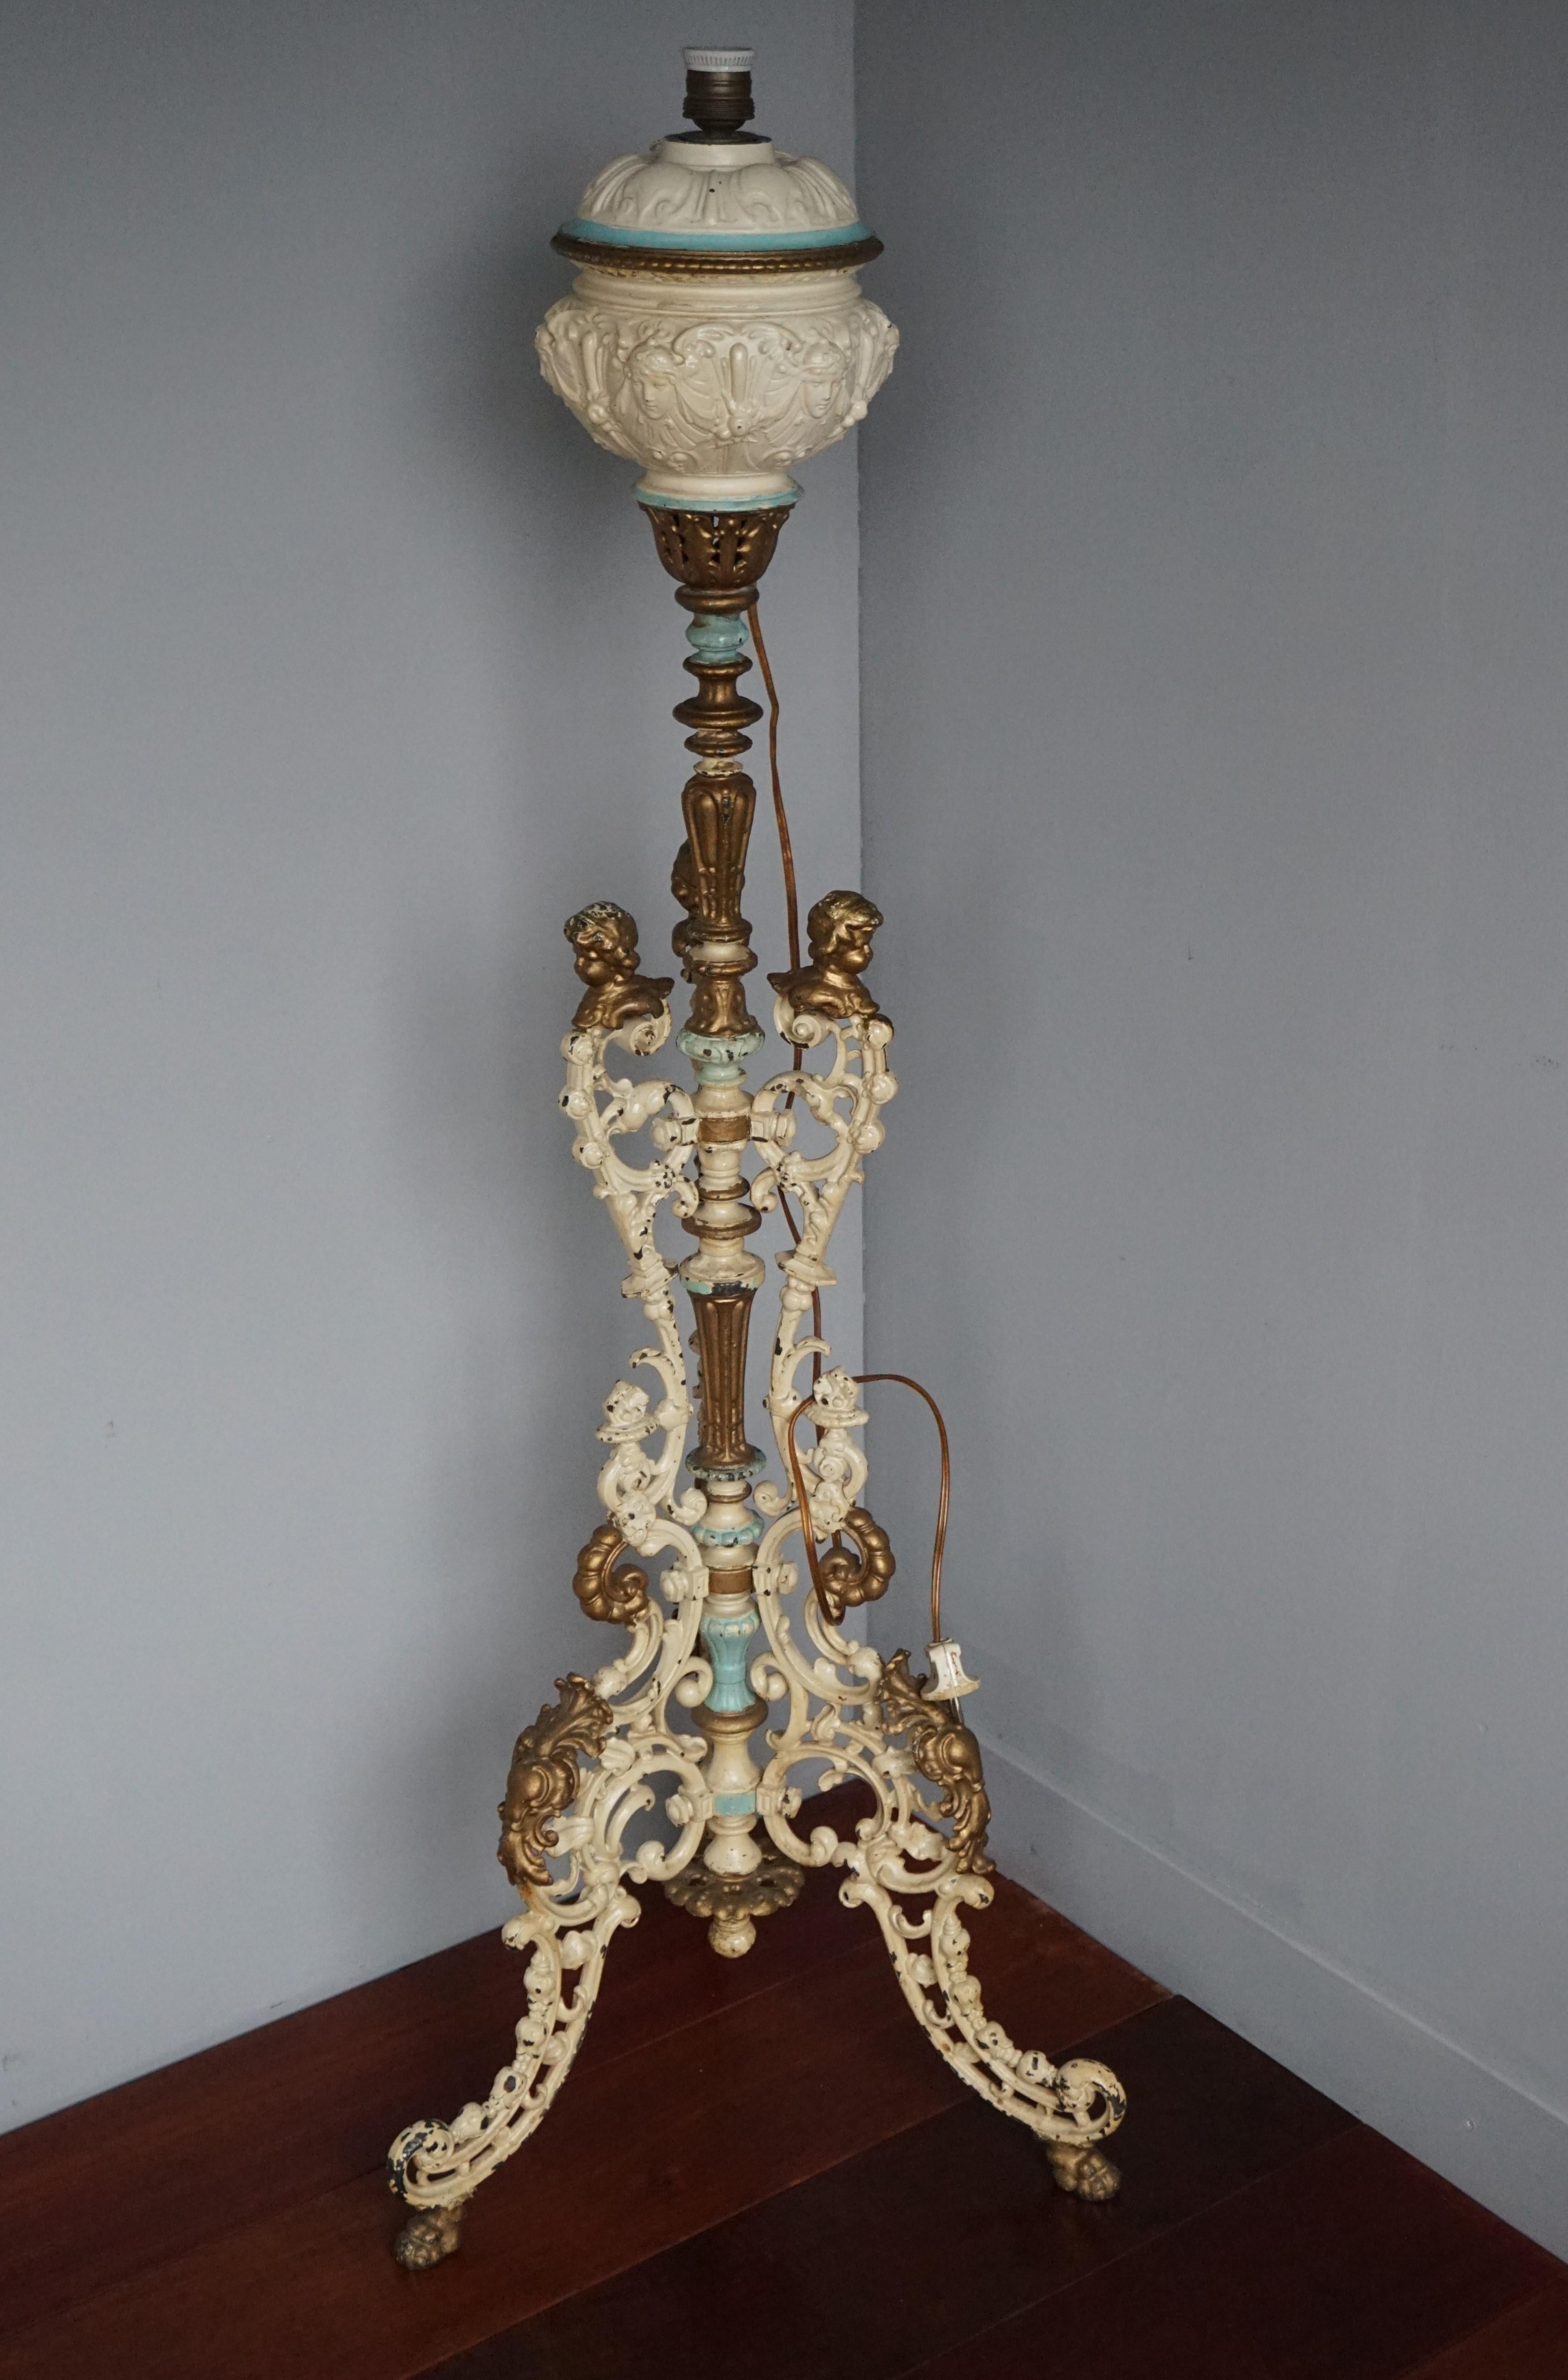 Antique and Painted Cast Iron Baroque Revival Floor Lamp w. Putti Bust Sculpture For Sale 11